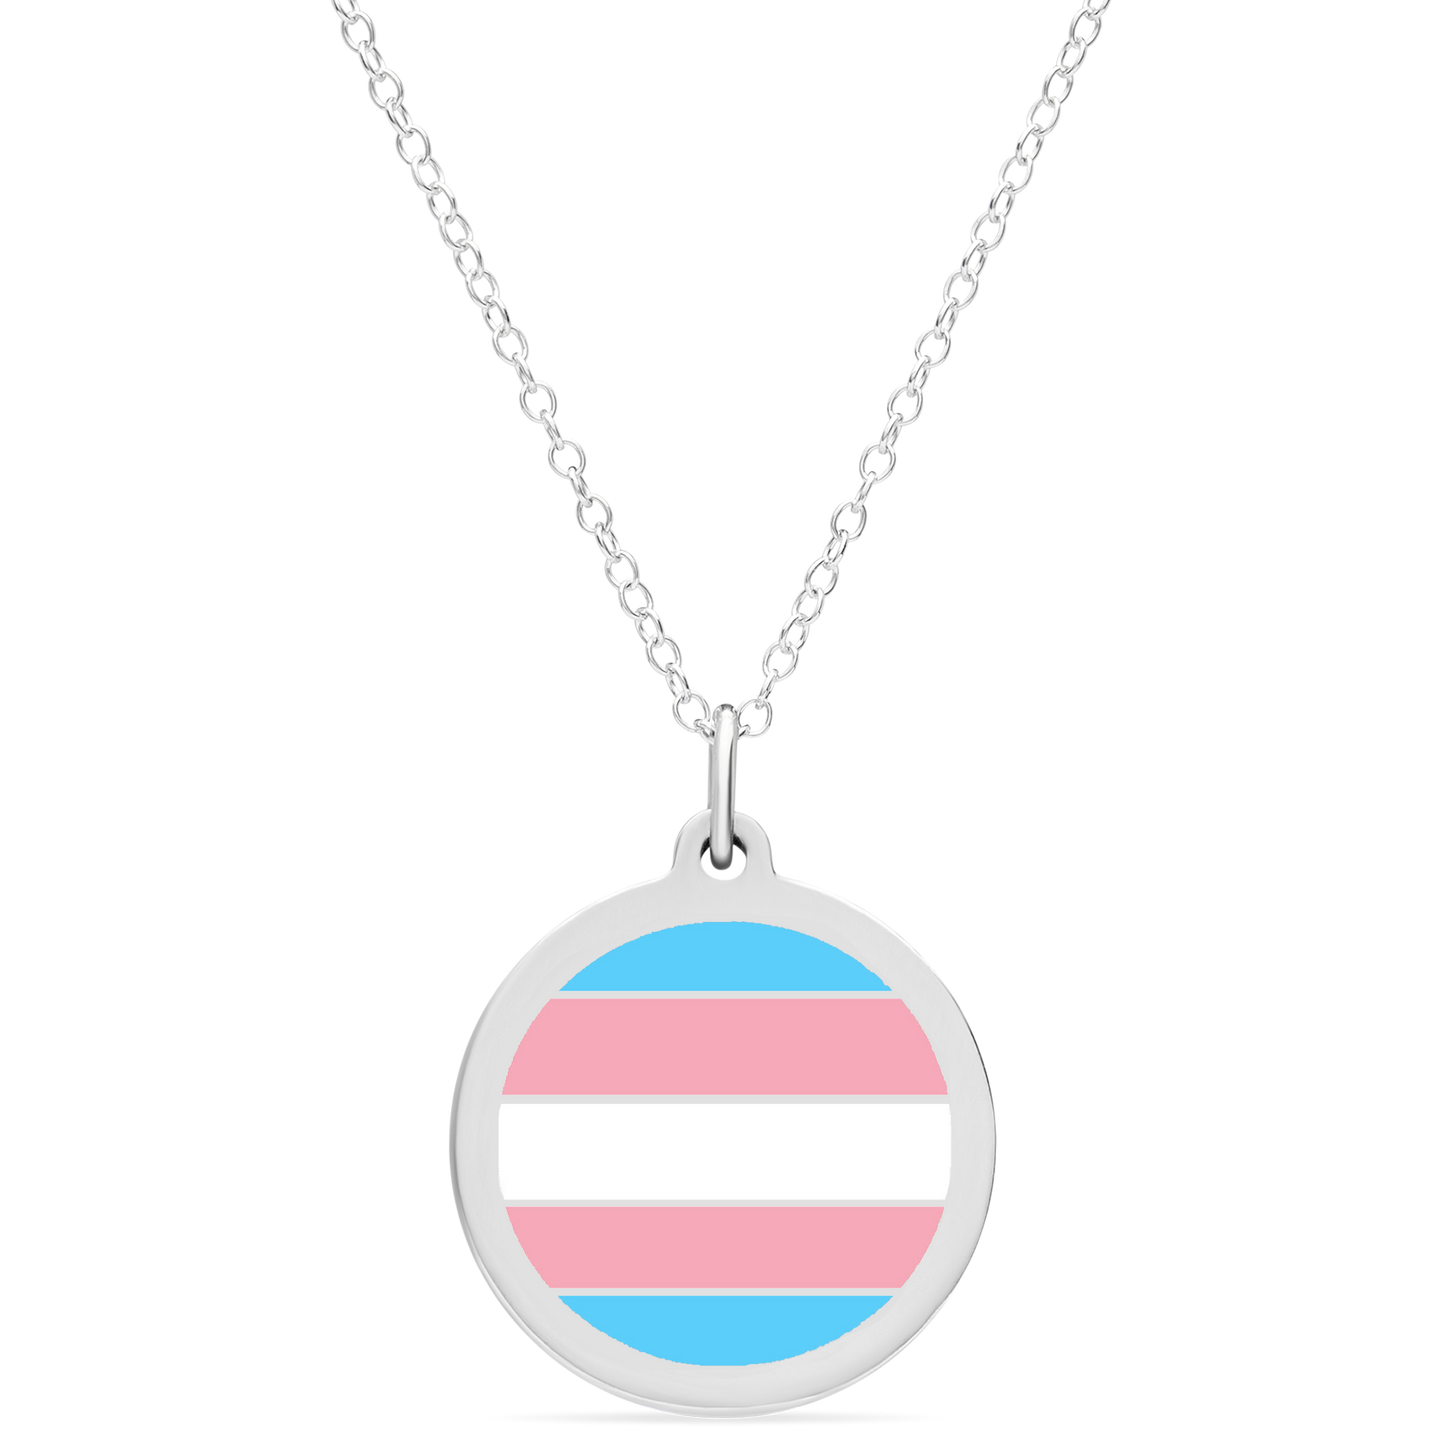 TRANS FLAG CHARM in sterling silver with rhodium plate